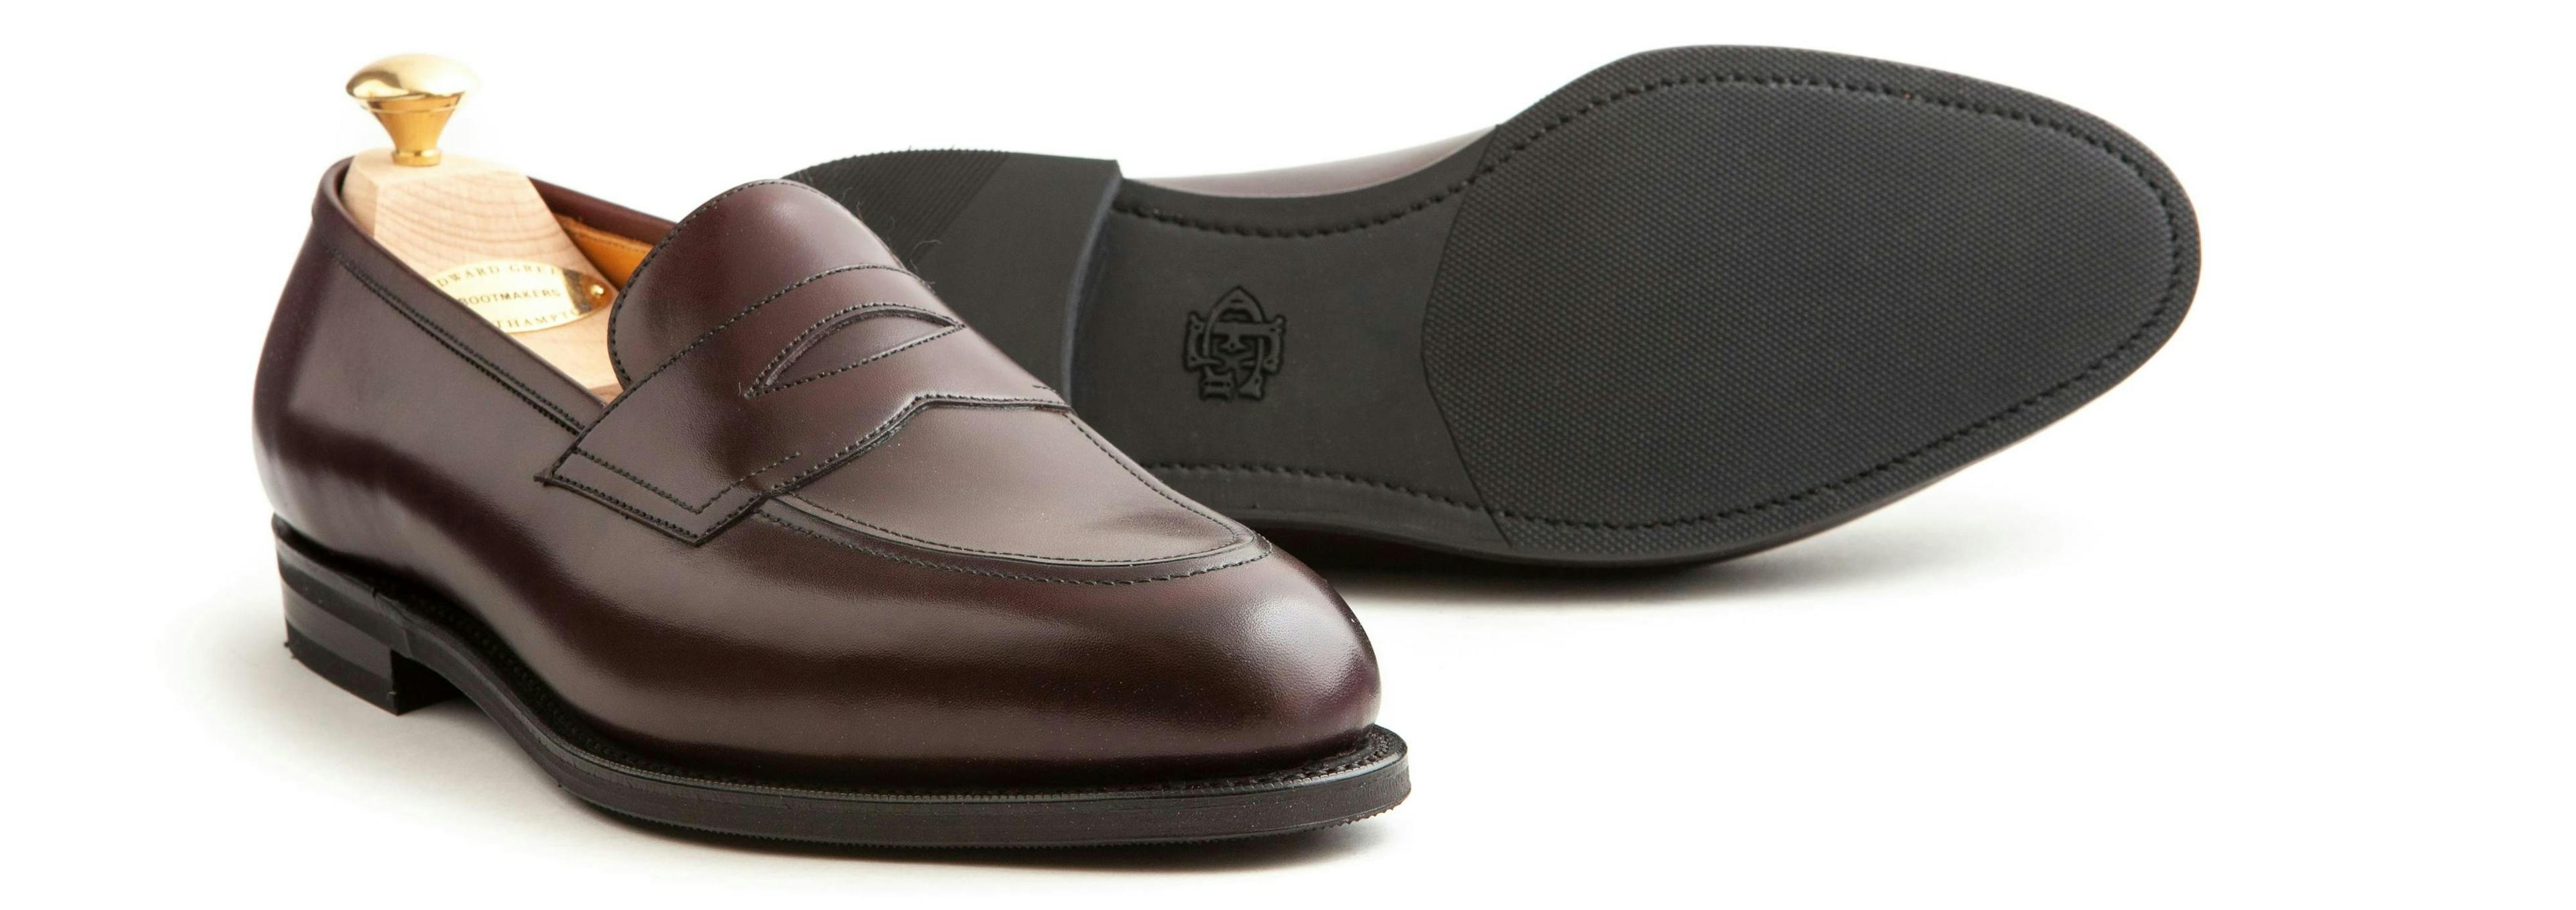 An Edward Green Piccadilly in burgundy calfskin, with a view of its R1 rubber soles.